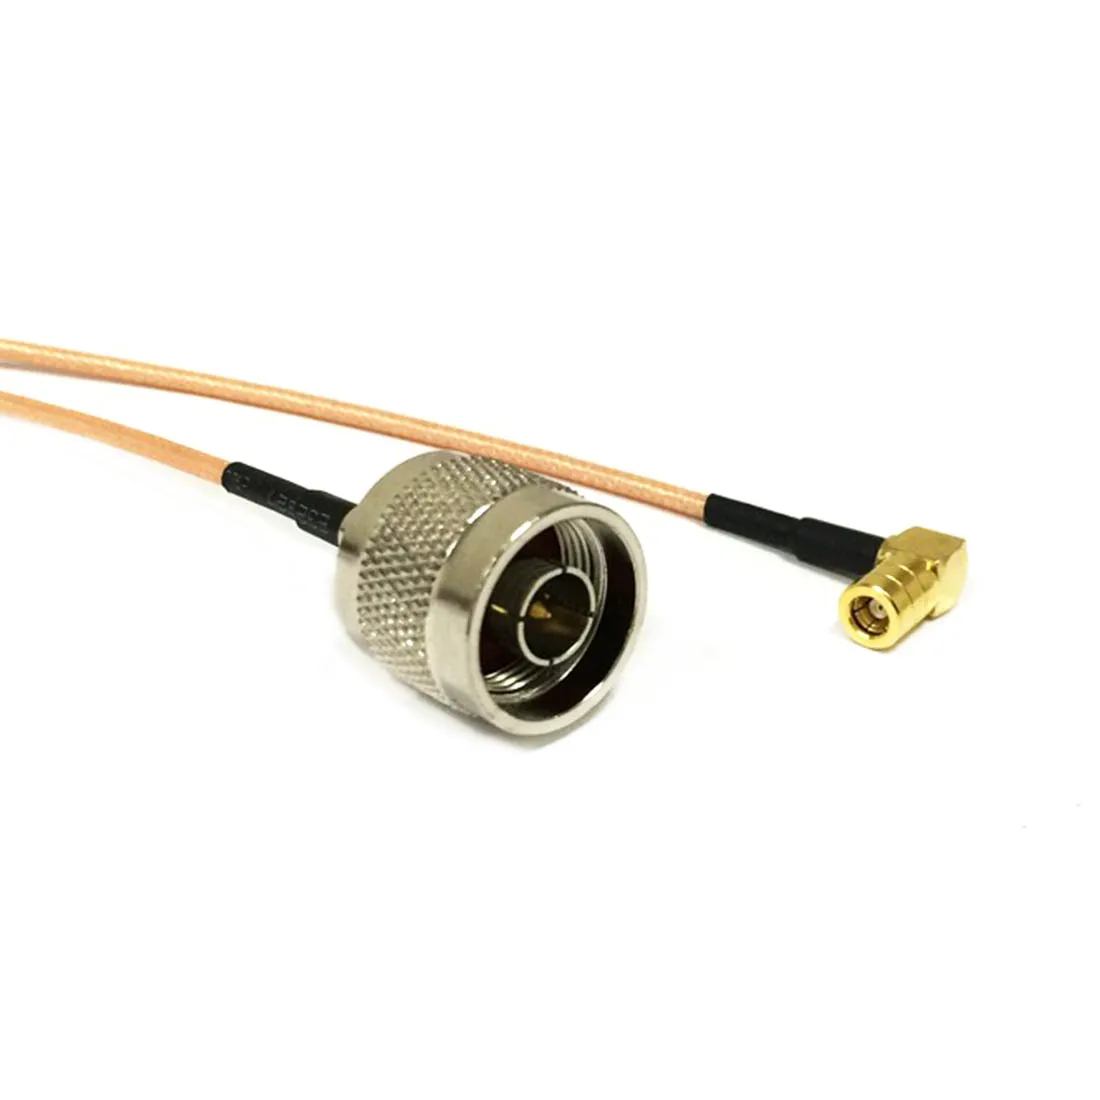 

Modem Coaxial Cable N Male Plug Switch SMB Female Jack Right Angle Connector RG316 Cable Pigtail 15cm 6" Adapter New